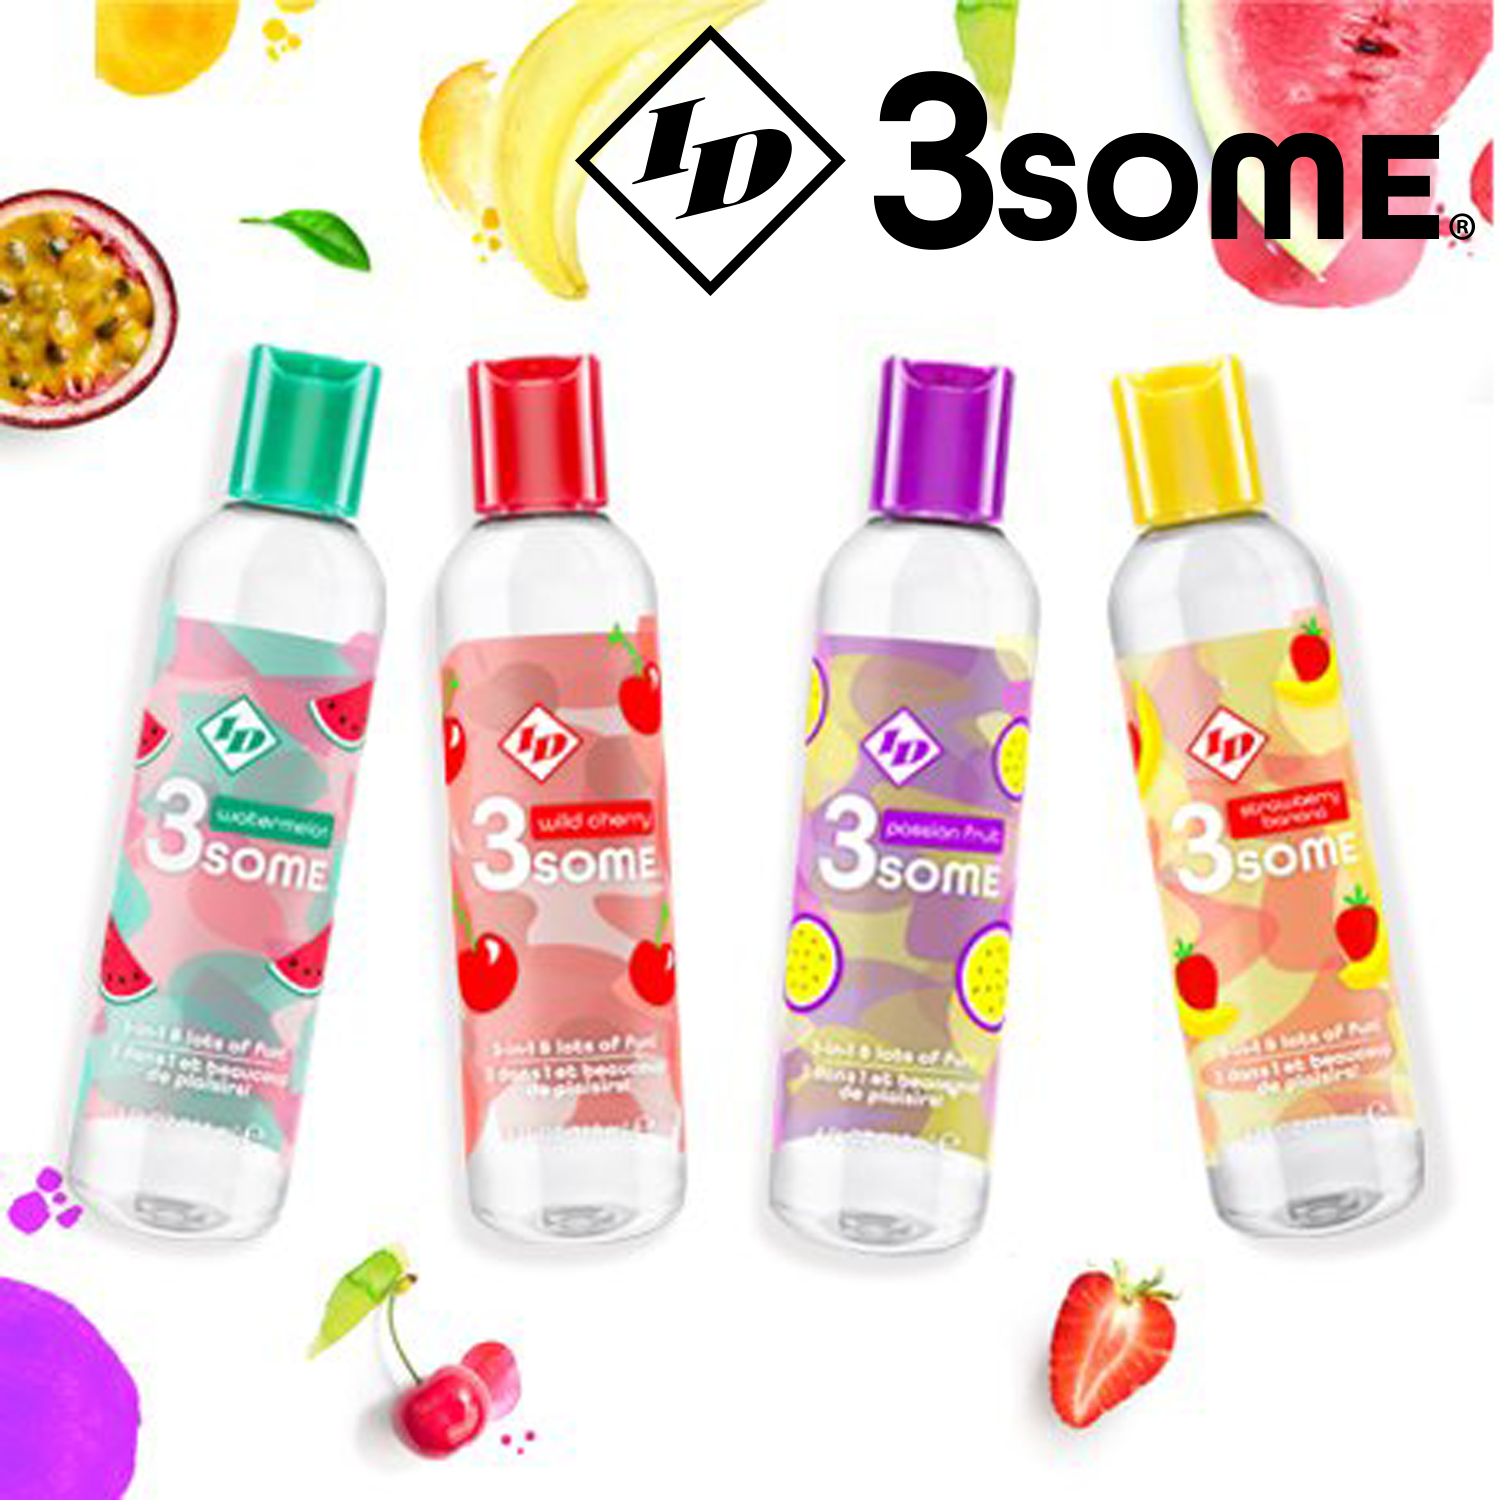 ID 3some logo displayed on the top right, with all four variants if ID 3some Flavoured Lubricant bottles (left to right): Watermelon; Wild Cherry; Passion Fruit; Strawberry Banana, and in the background are assort4ed fruits and berries showing the flavour profile.